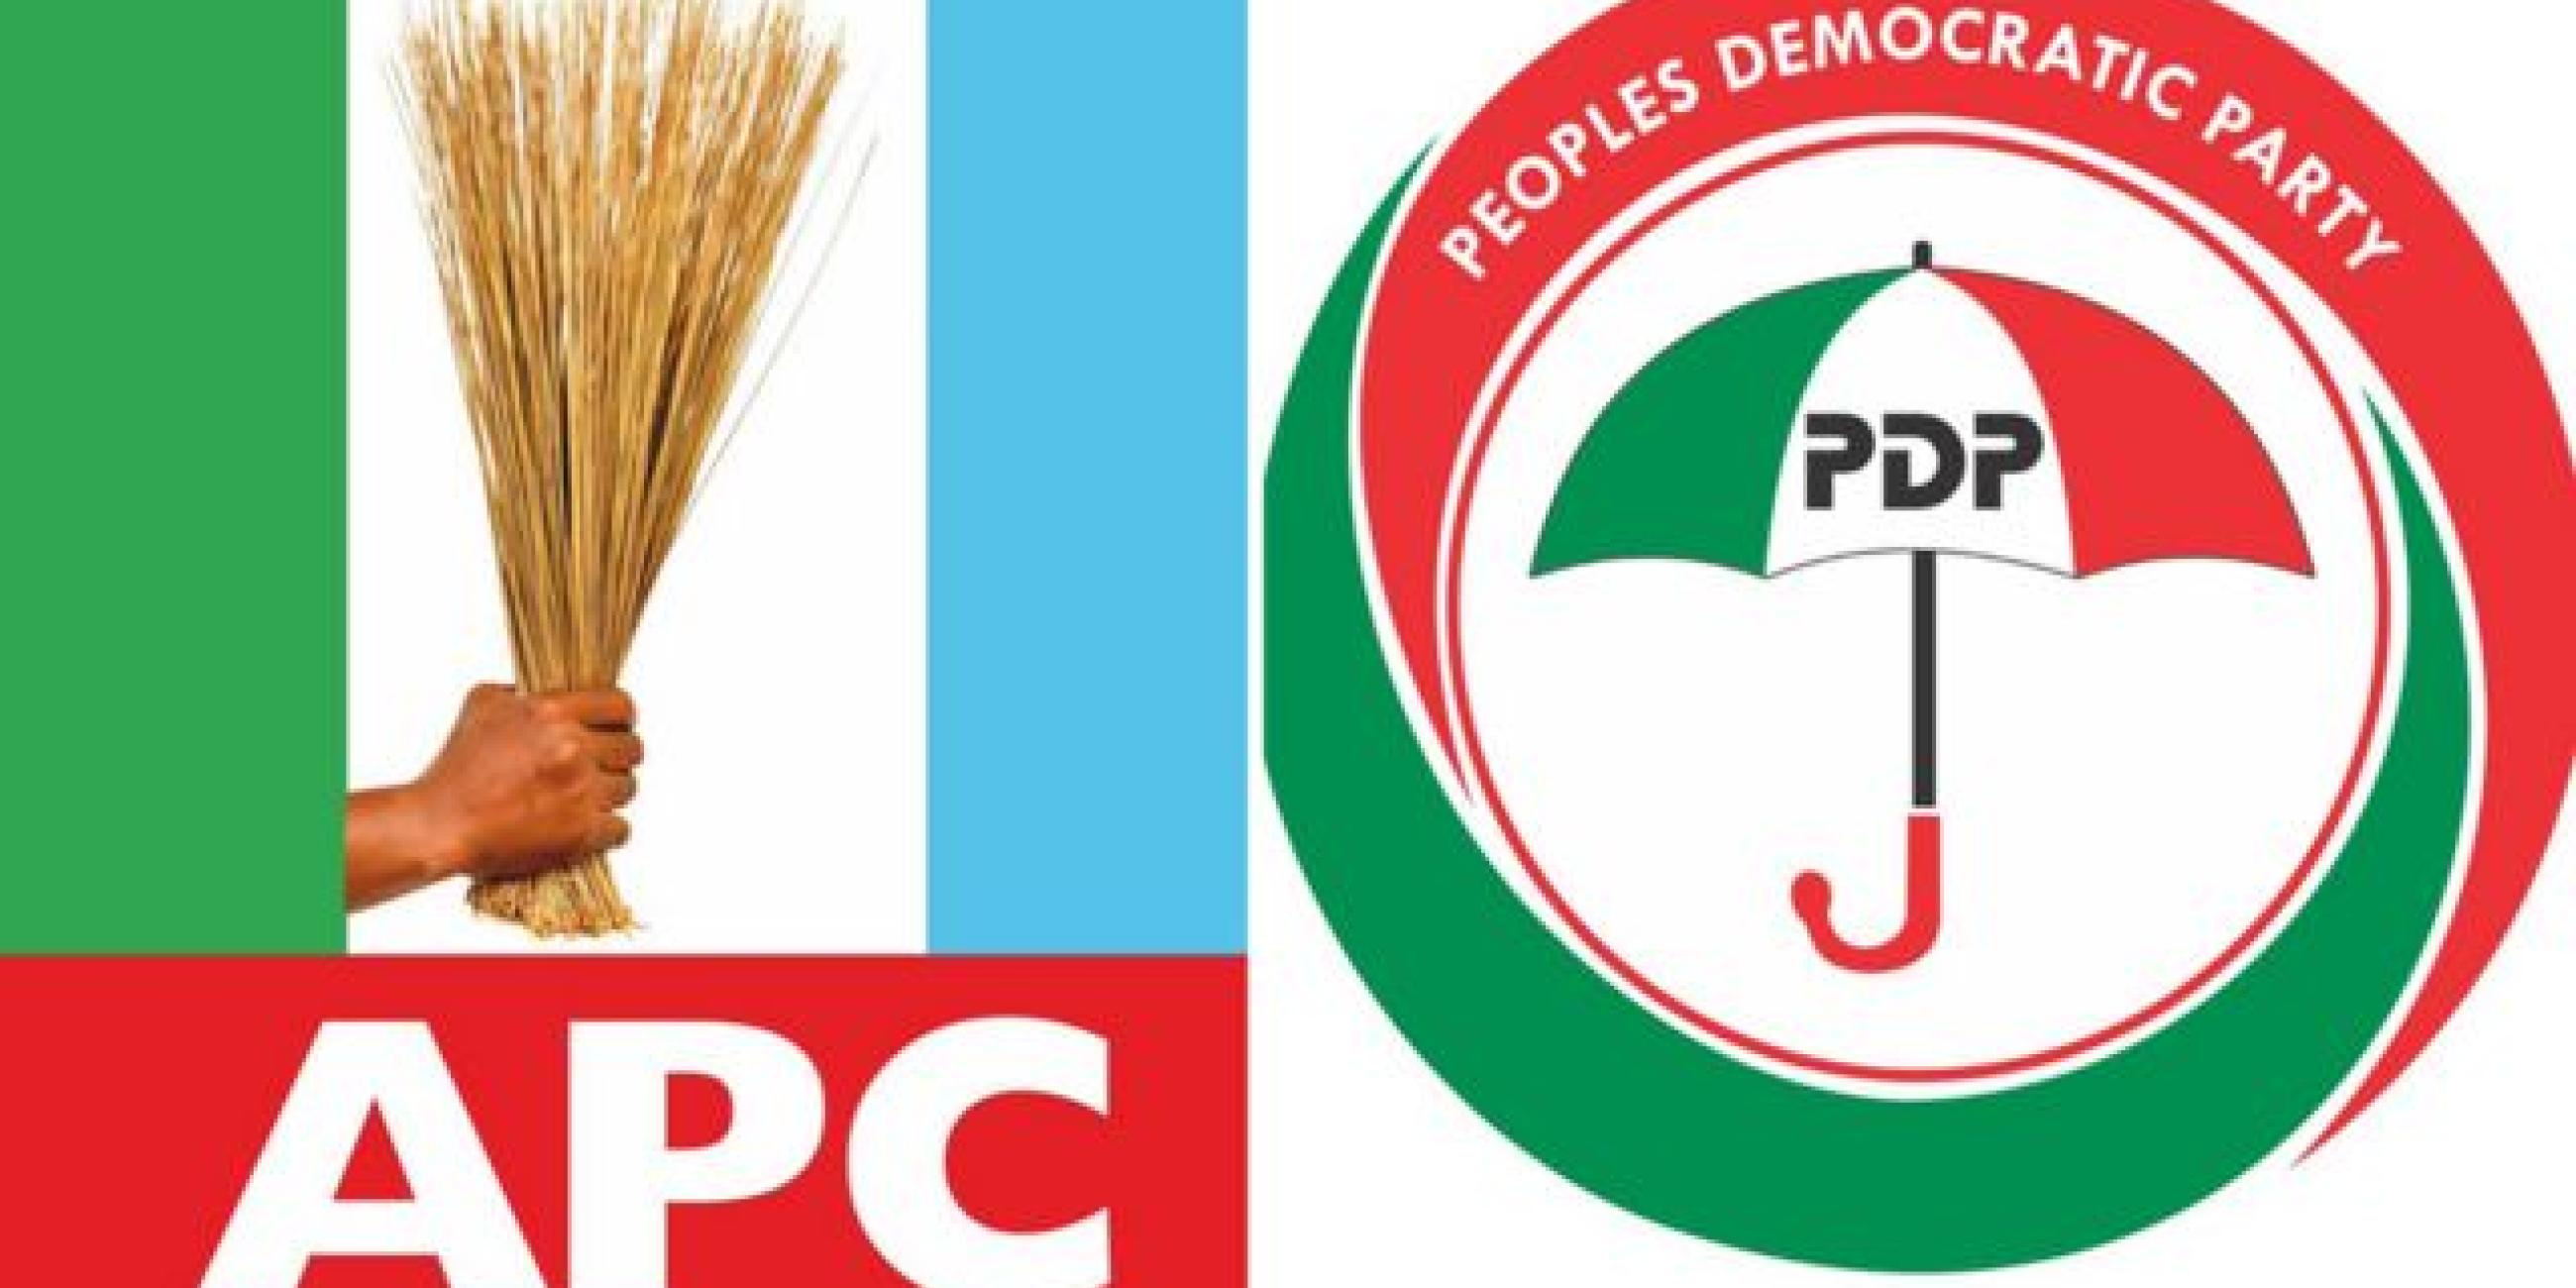 APC, PDP Mass Collection Of Voters’ Data In Enugu Causes Distrust Ahead